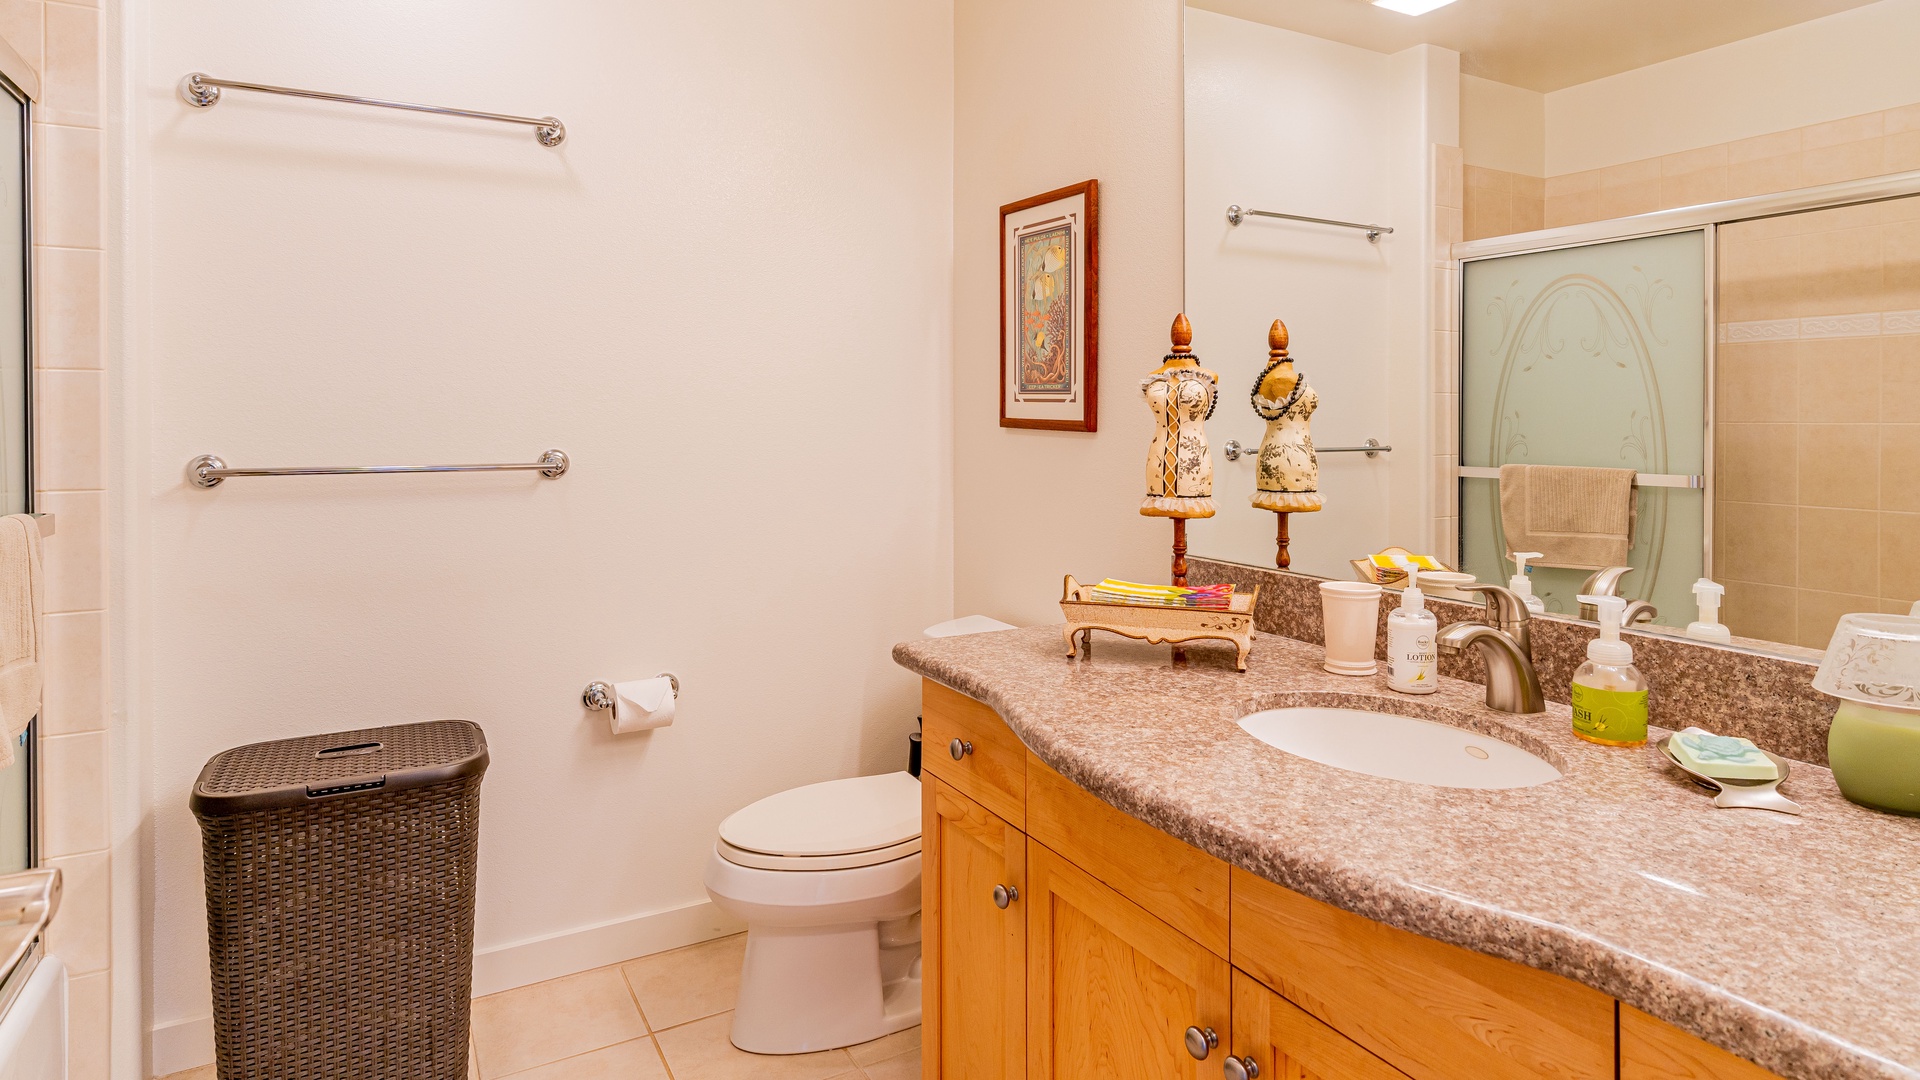 Kapolei Vacation Rentals, Kai Lani 16C - The second guest bathroom is also a full bathroom.